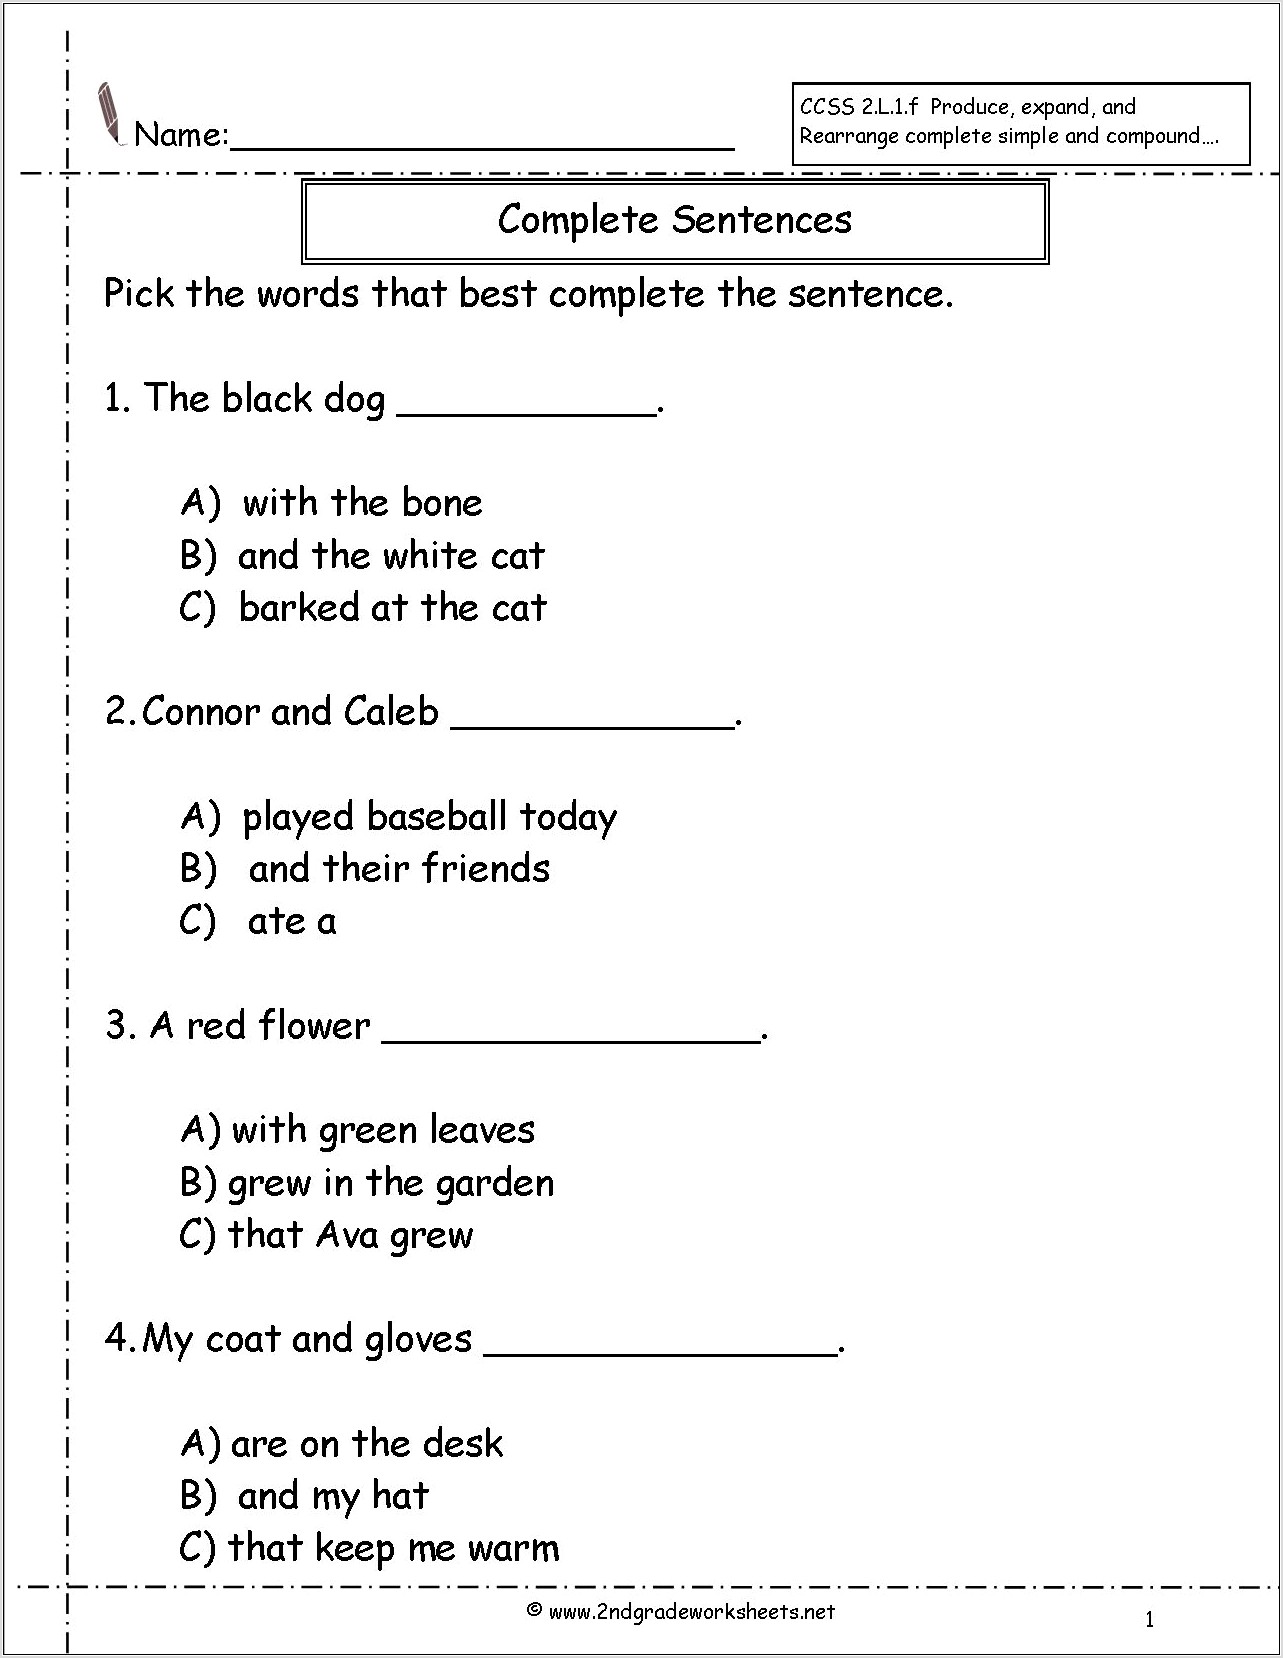 kinds-of-sentences-class-4-worksheet-fill-in-the-blanks-identify-the